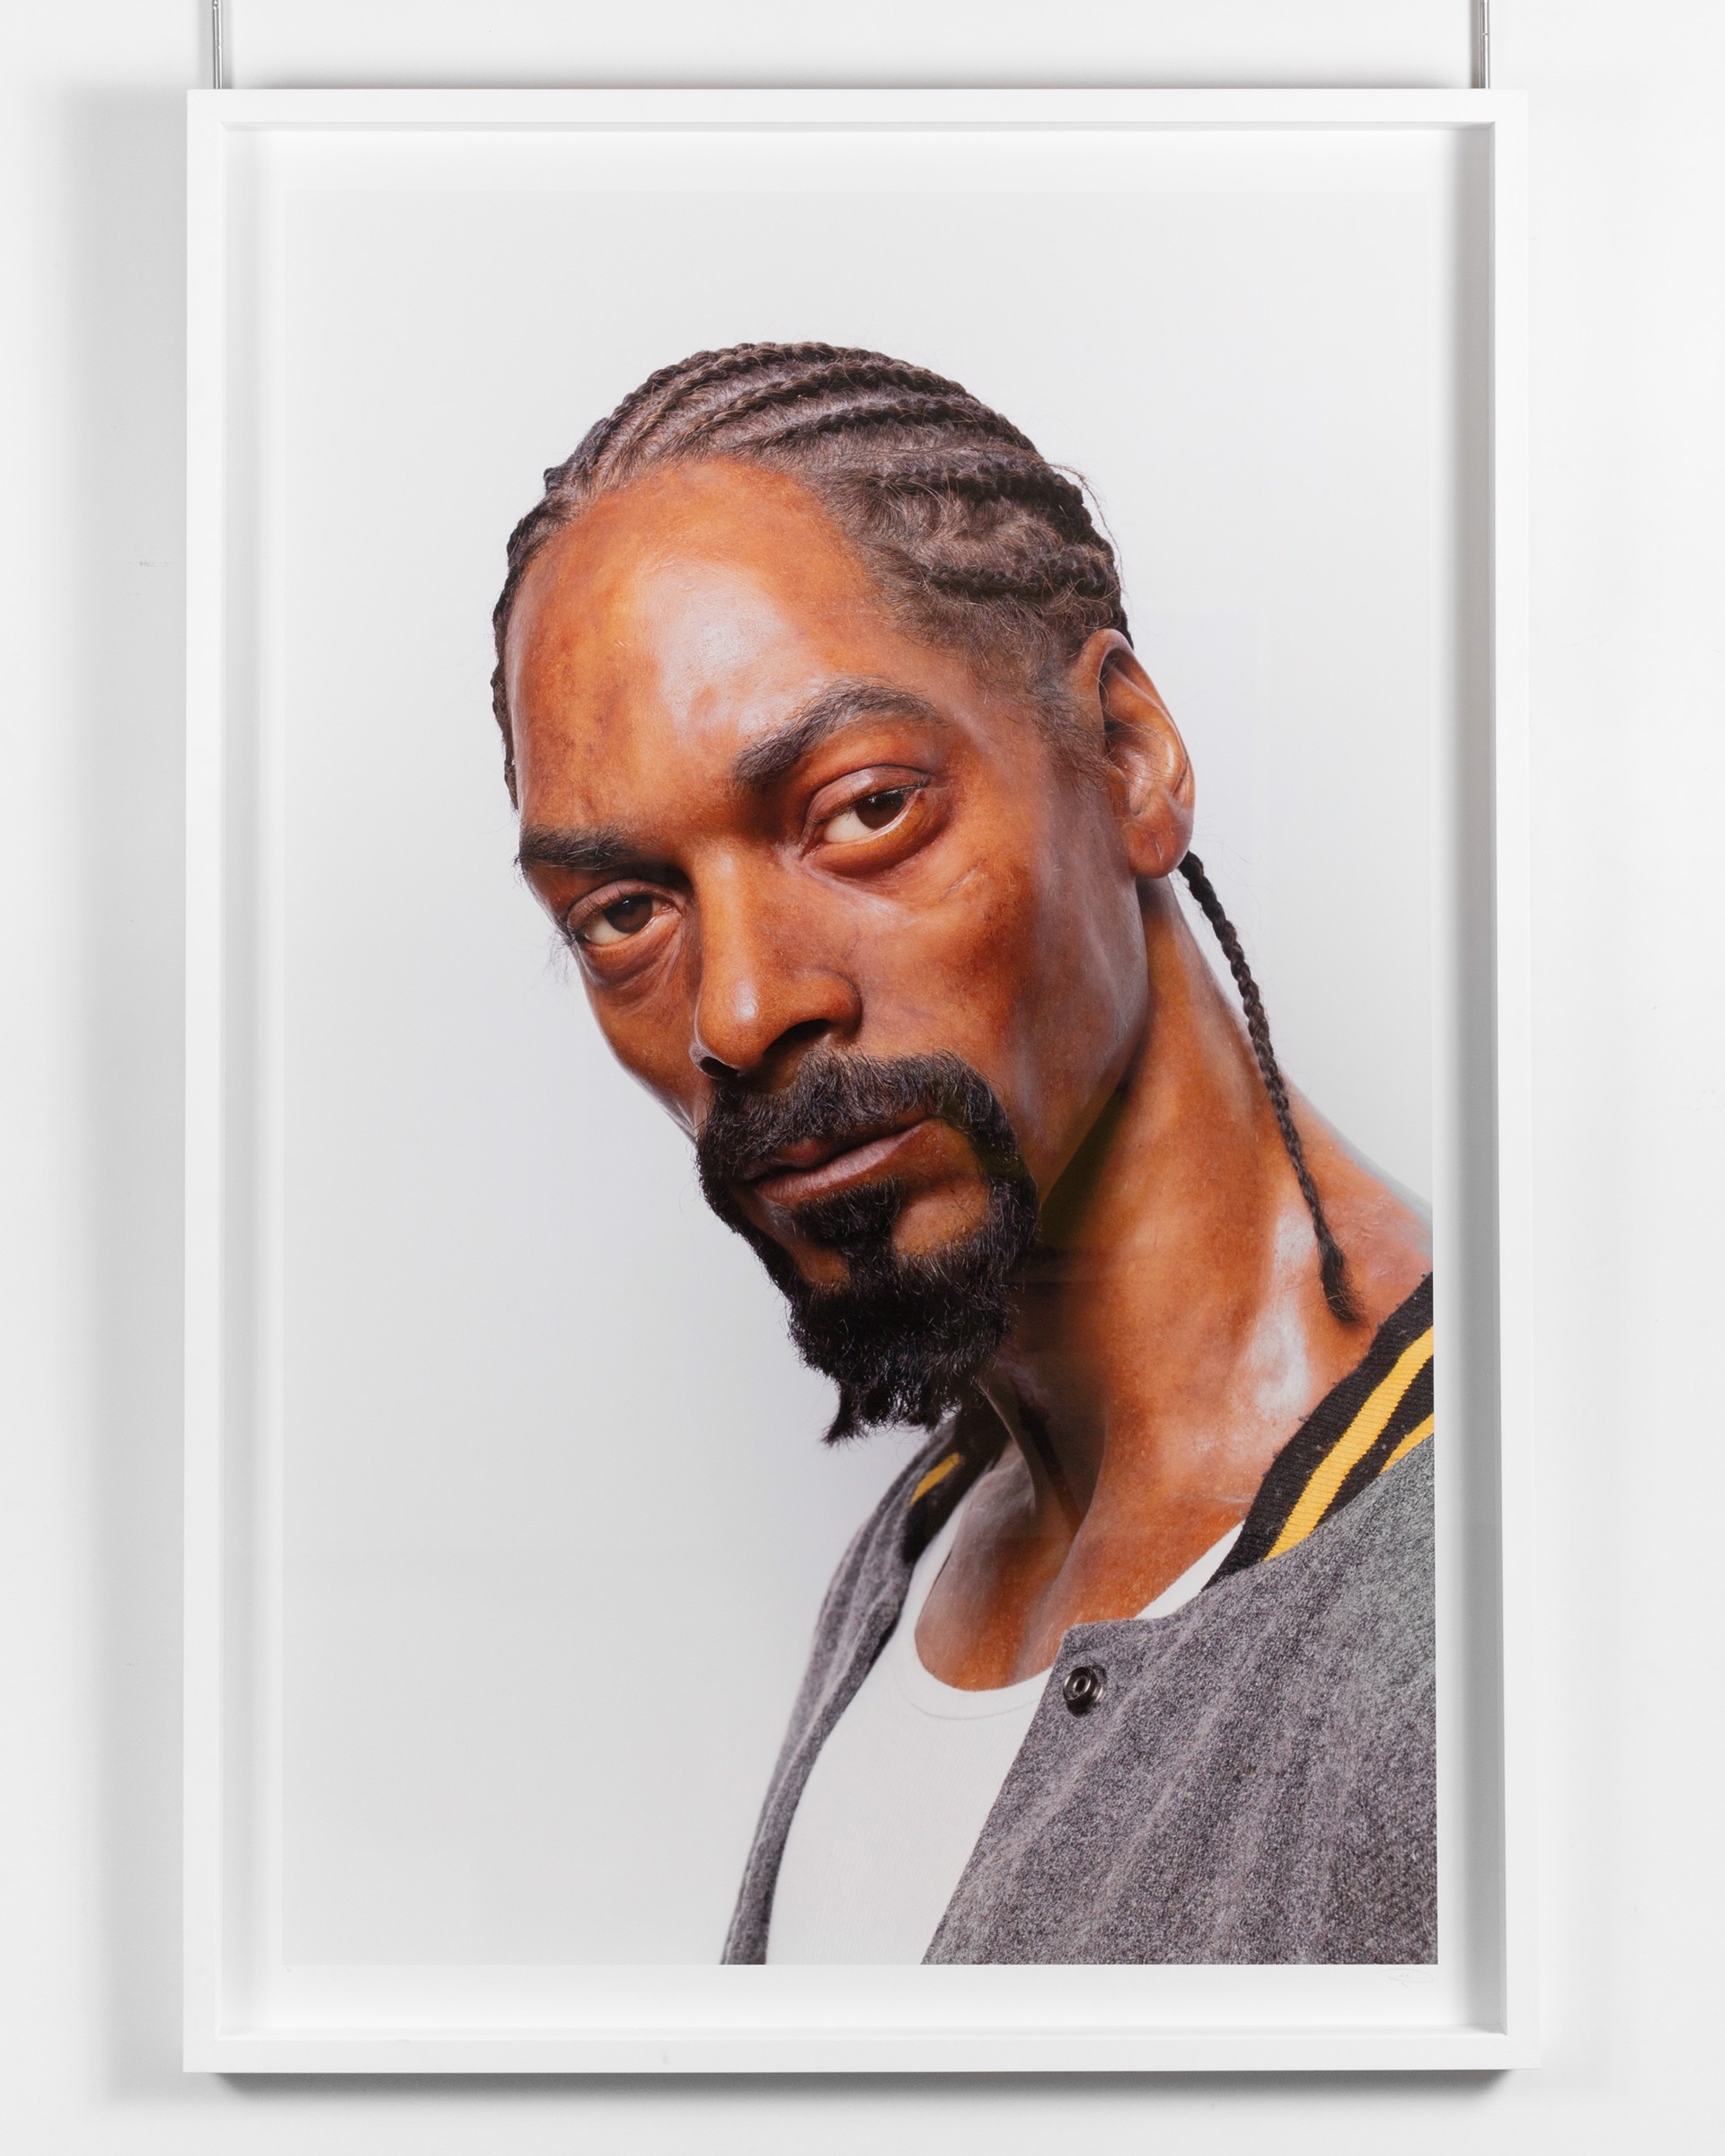 This is not Snoop Dogg by Peter Andrew Lusztyk | Uncanny Valley